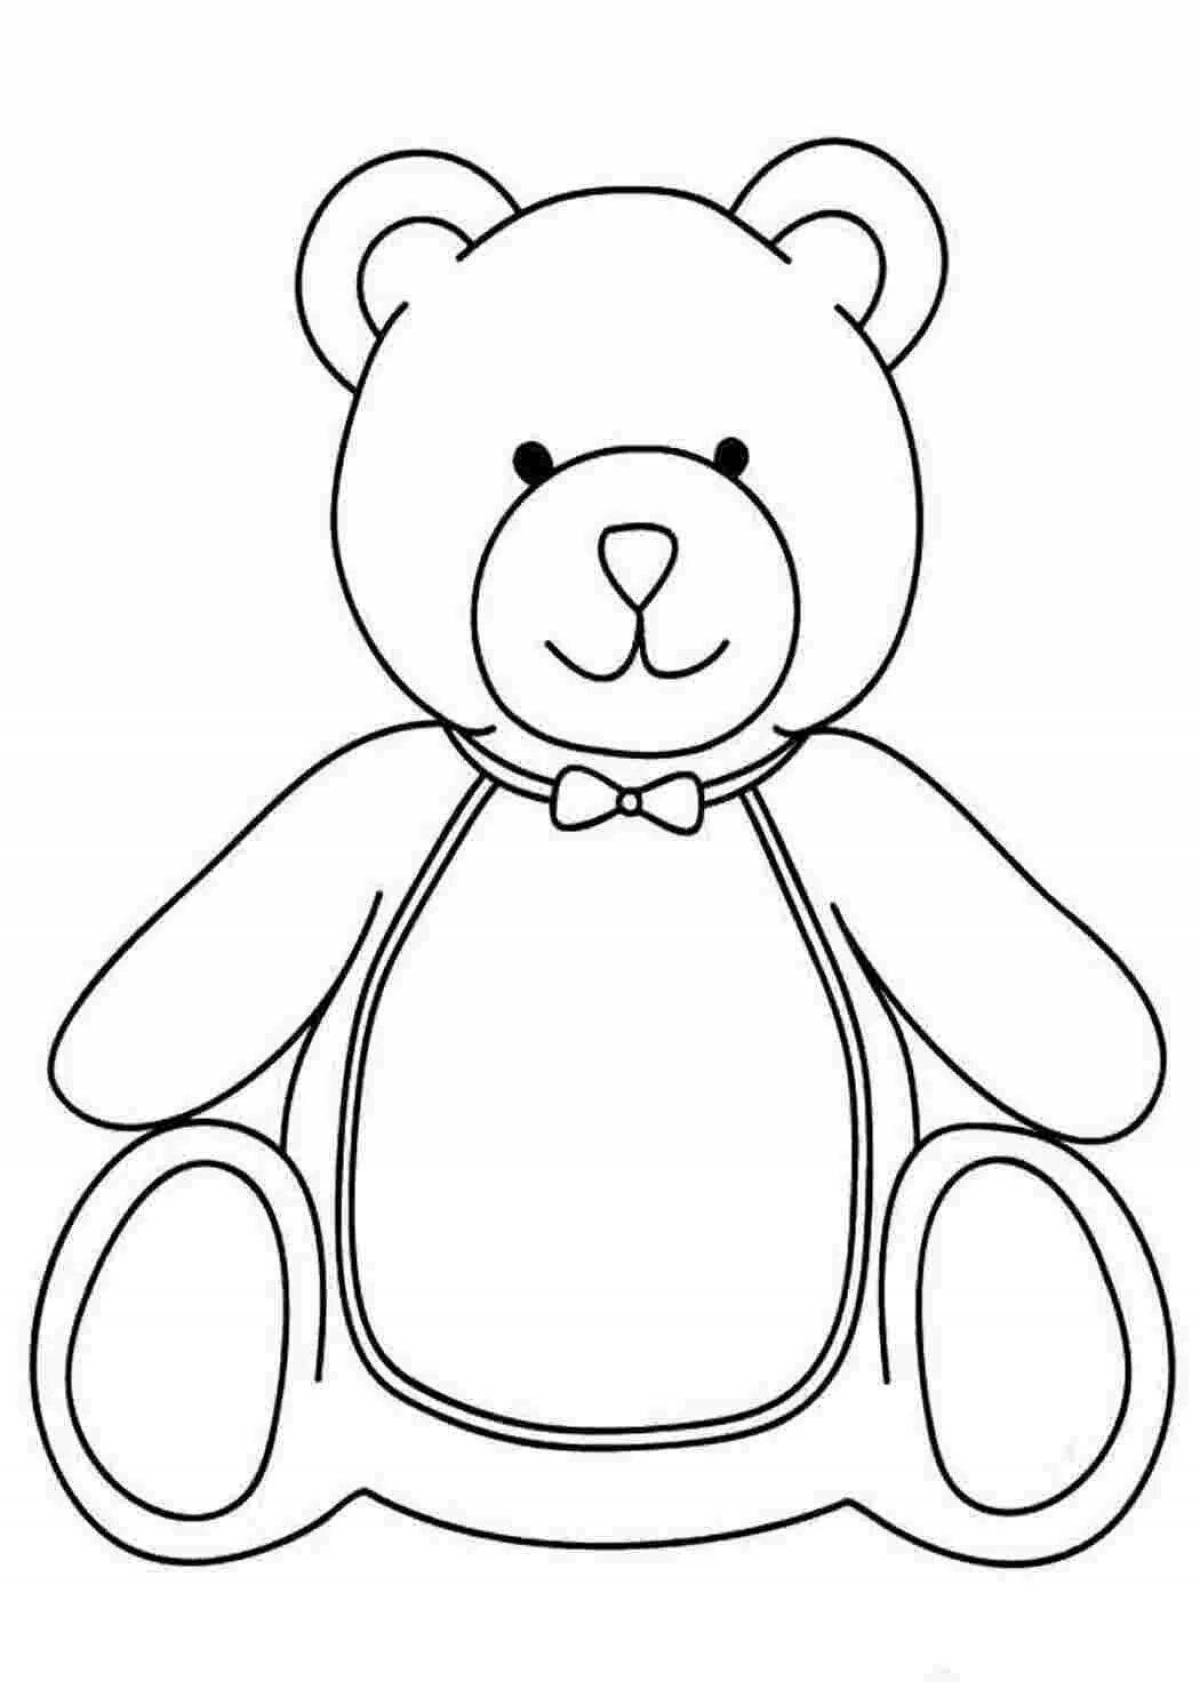 Coloring teddy bear during the game